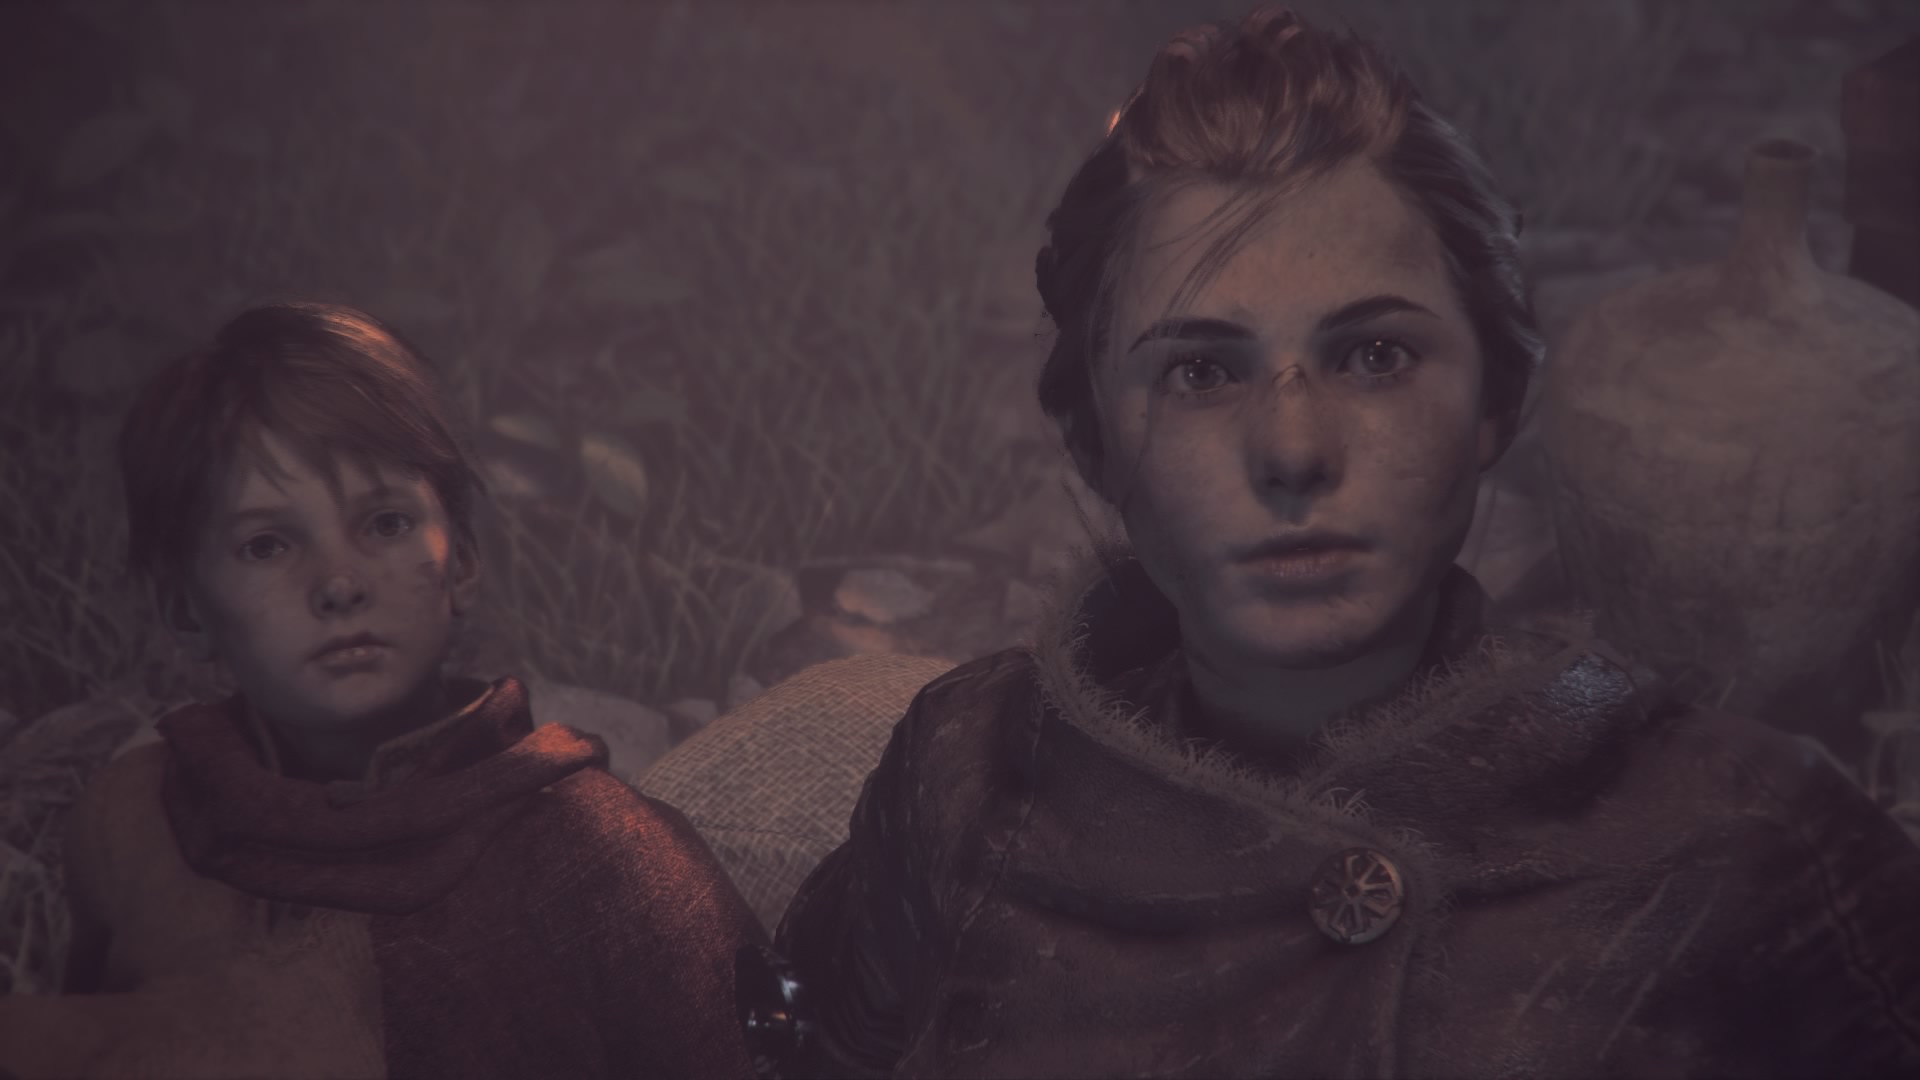 Brilliant 14th century stealth adventure A Plague Tale: Innocence is next  week's Epic Store freebie